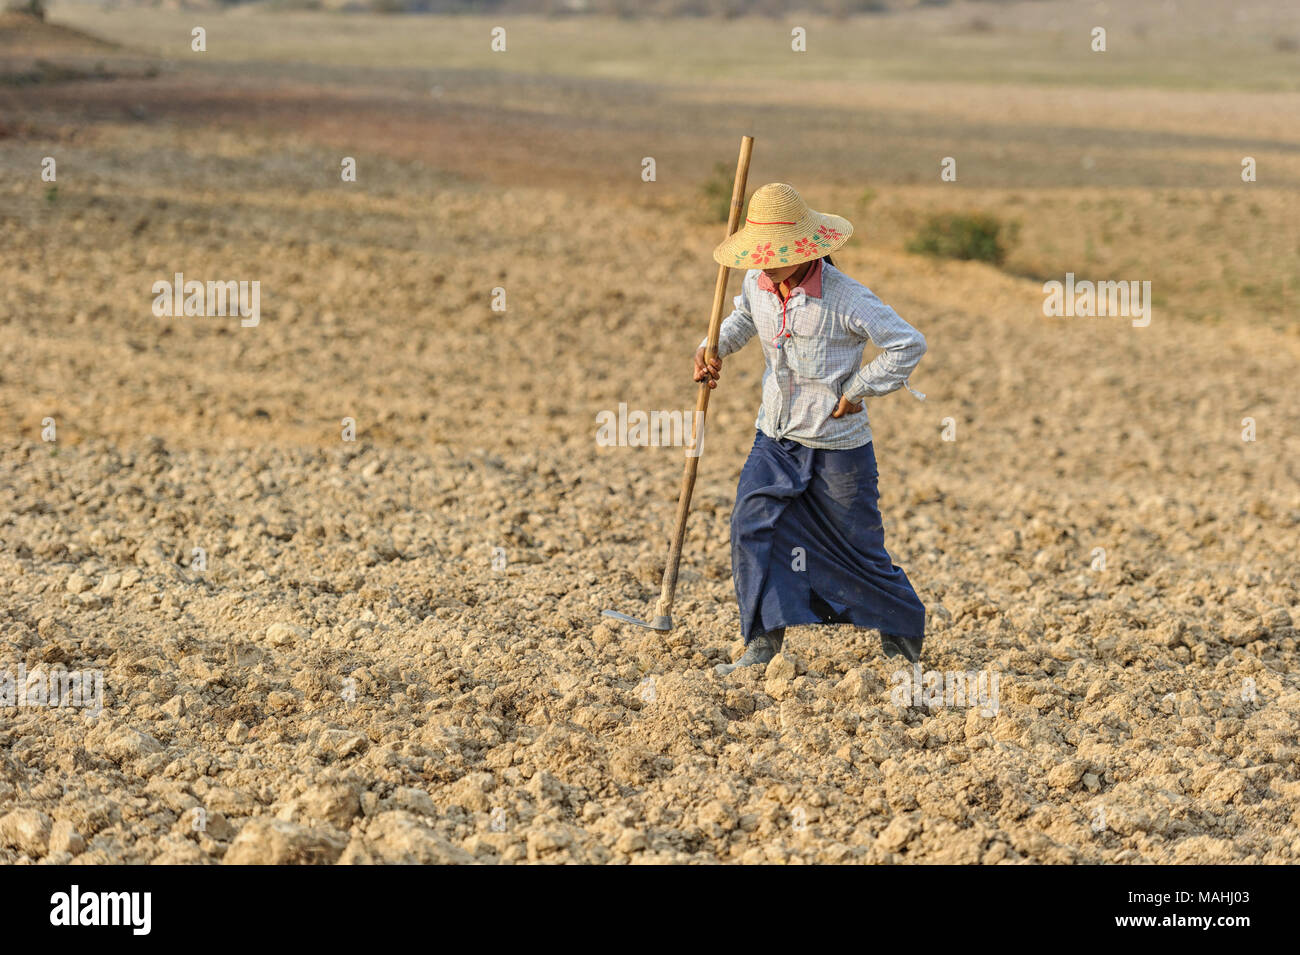 Woman harvesting in a taro root (colocasia esculenta) field, Shan State, Myanmar Stock Photo